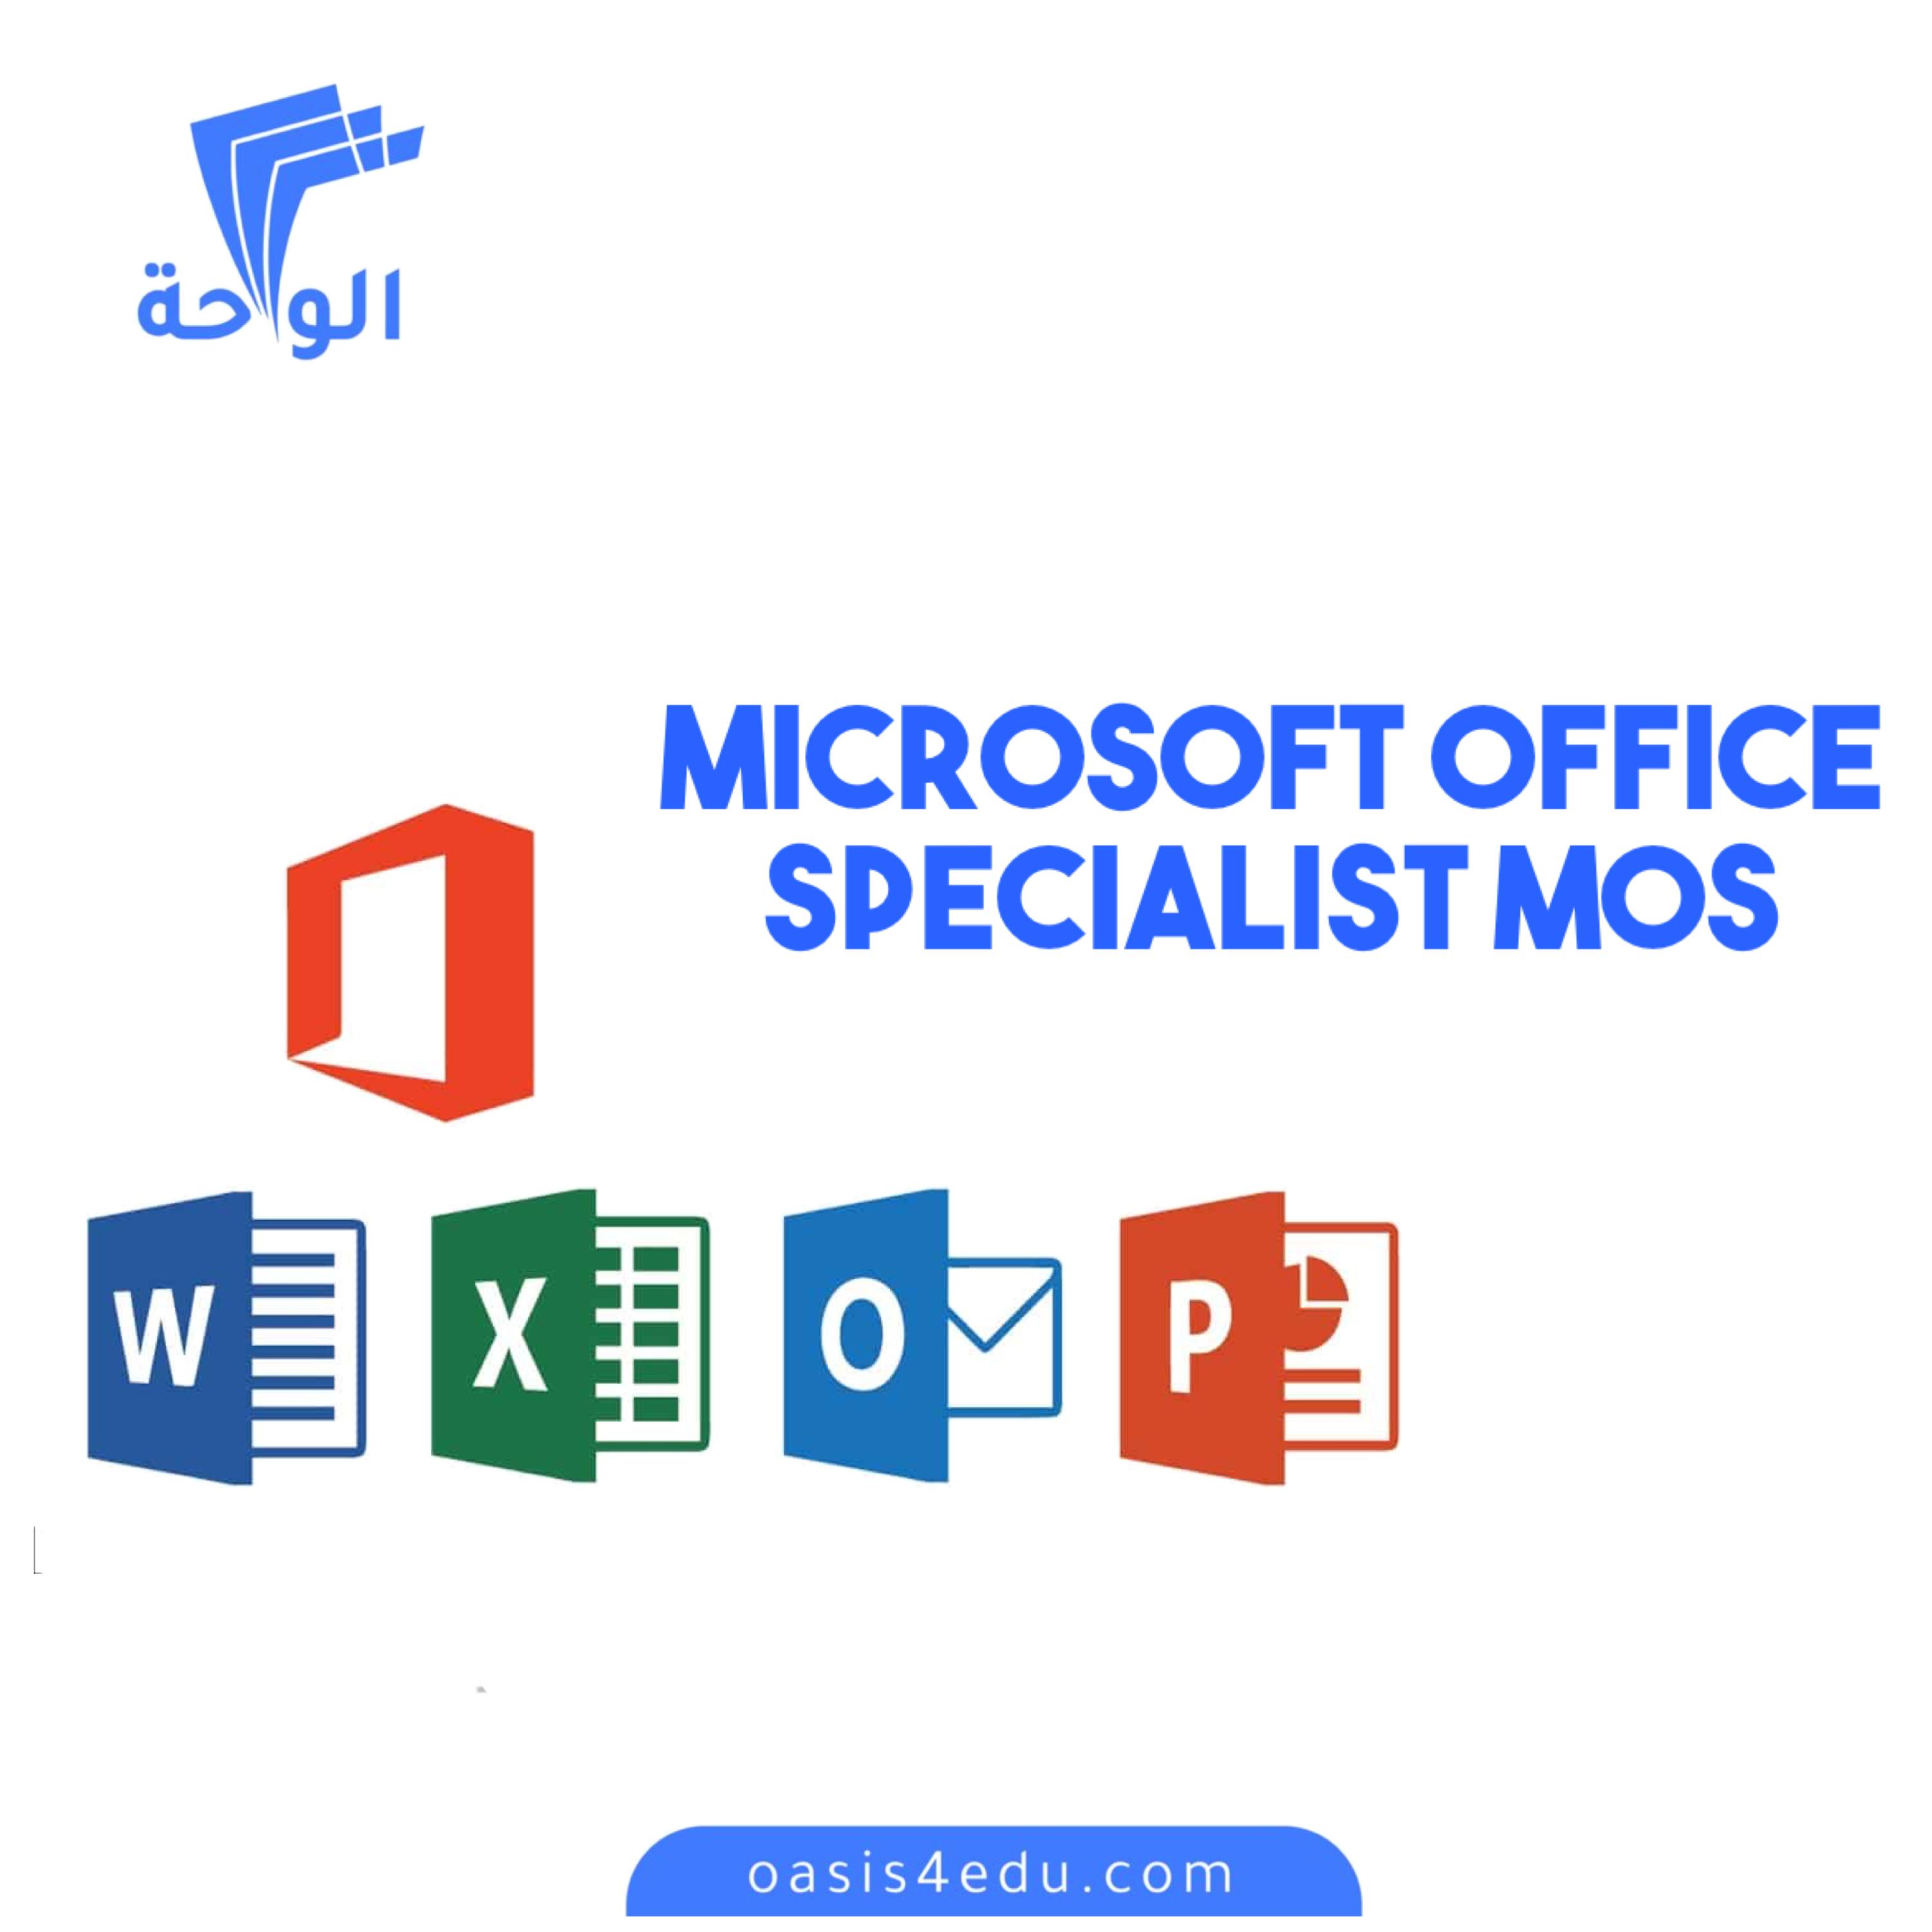 Microsoft office Specialist MOS